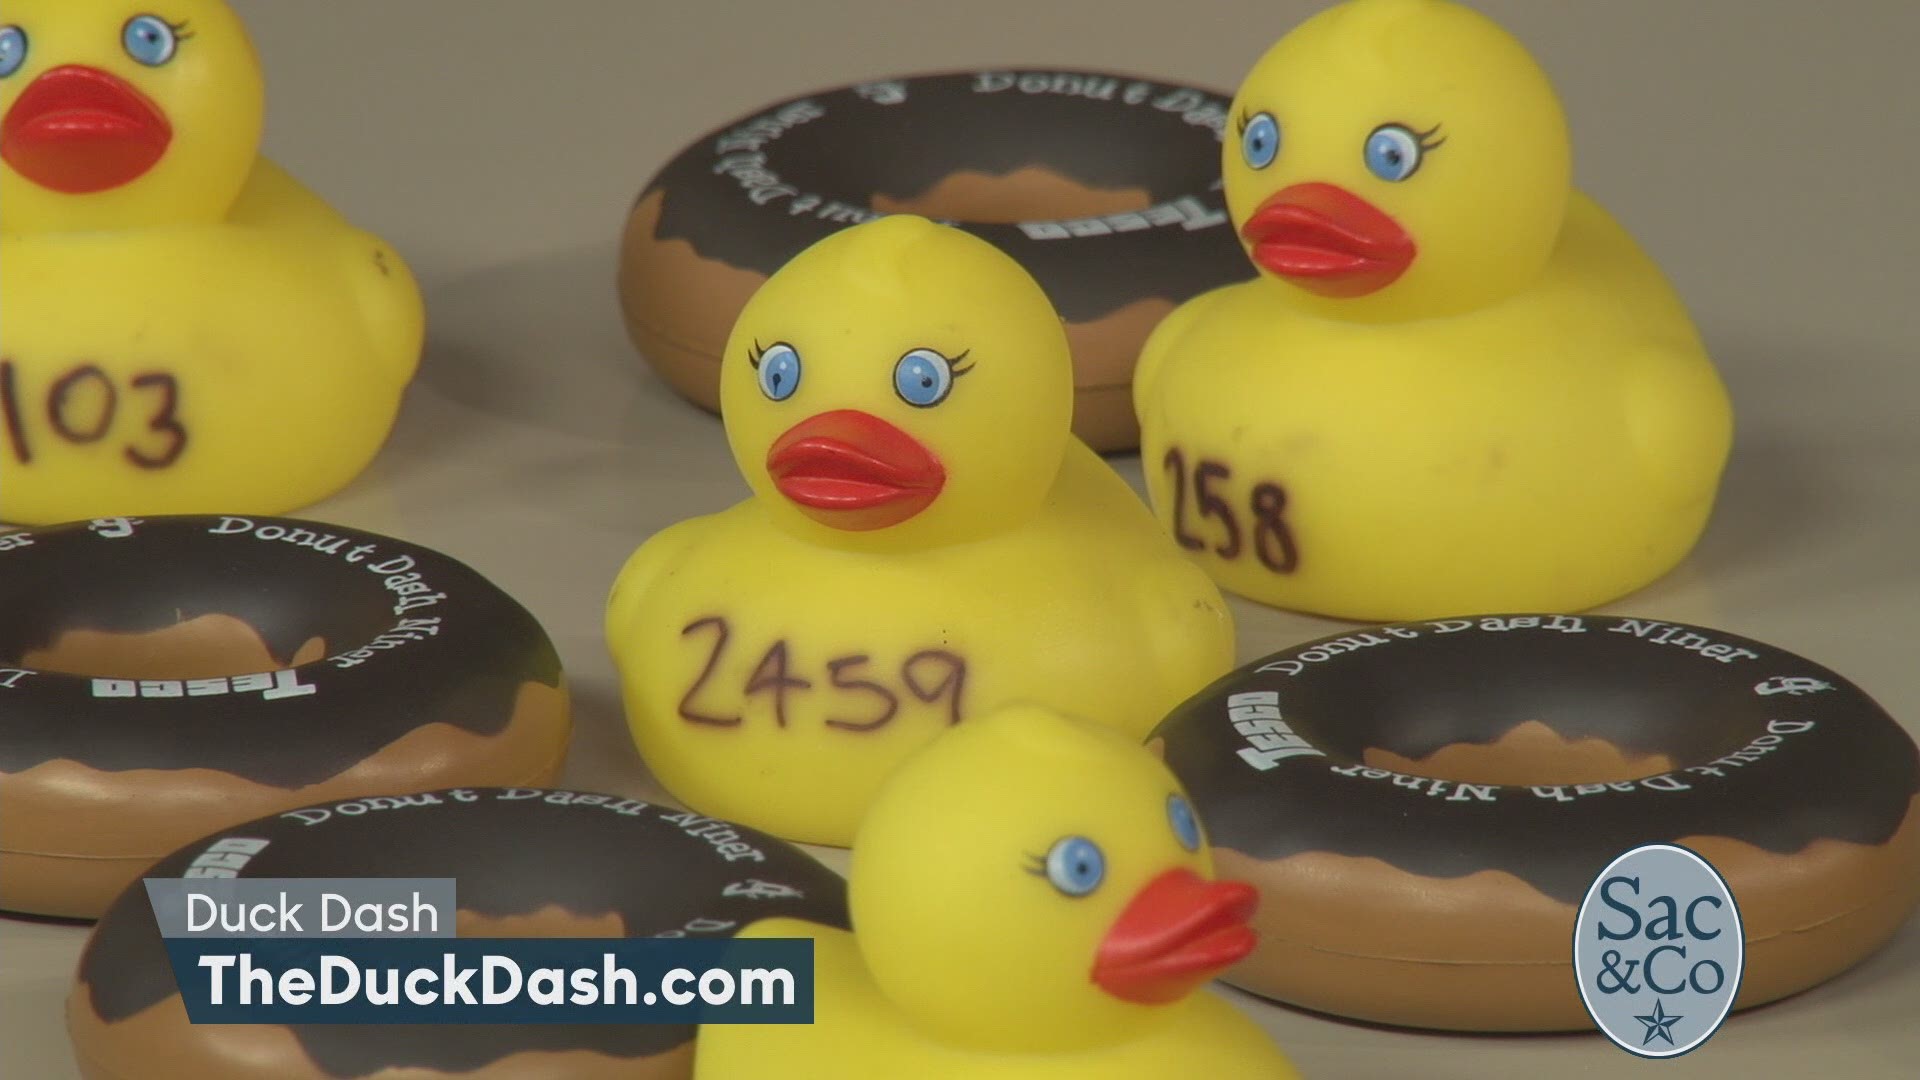 Join Quick Quack Car Wash in raising money for the UC Davis Children’s Hospital! The following is a paid segment sponsored by UC Davis Children’s Hospital.